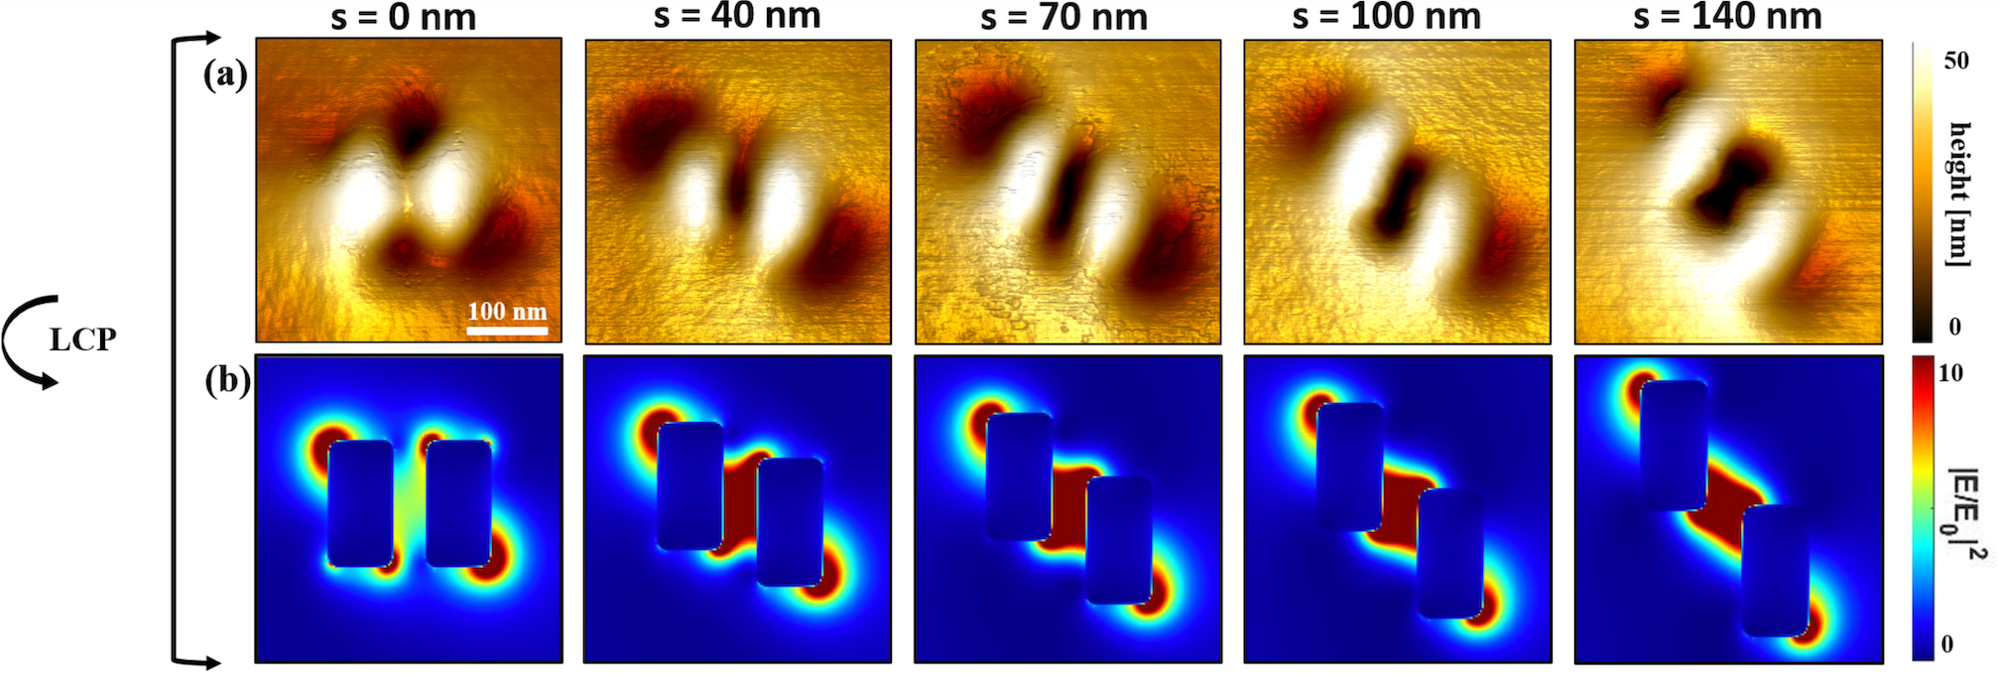 Photochemical imaging of shifted gold nanorods